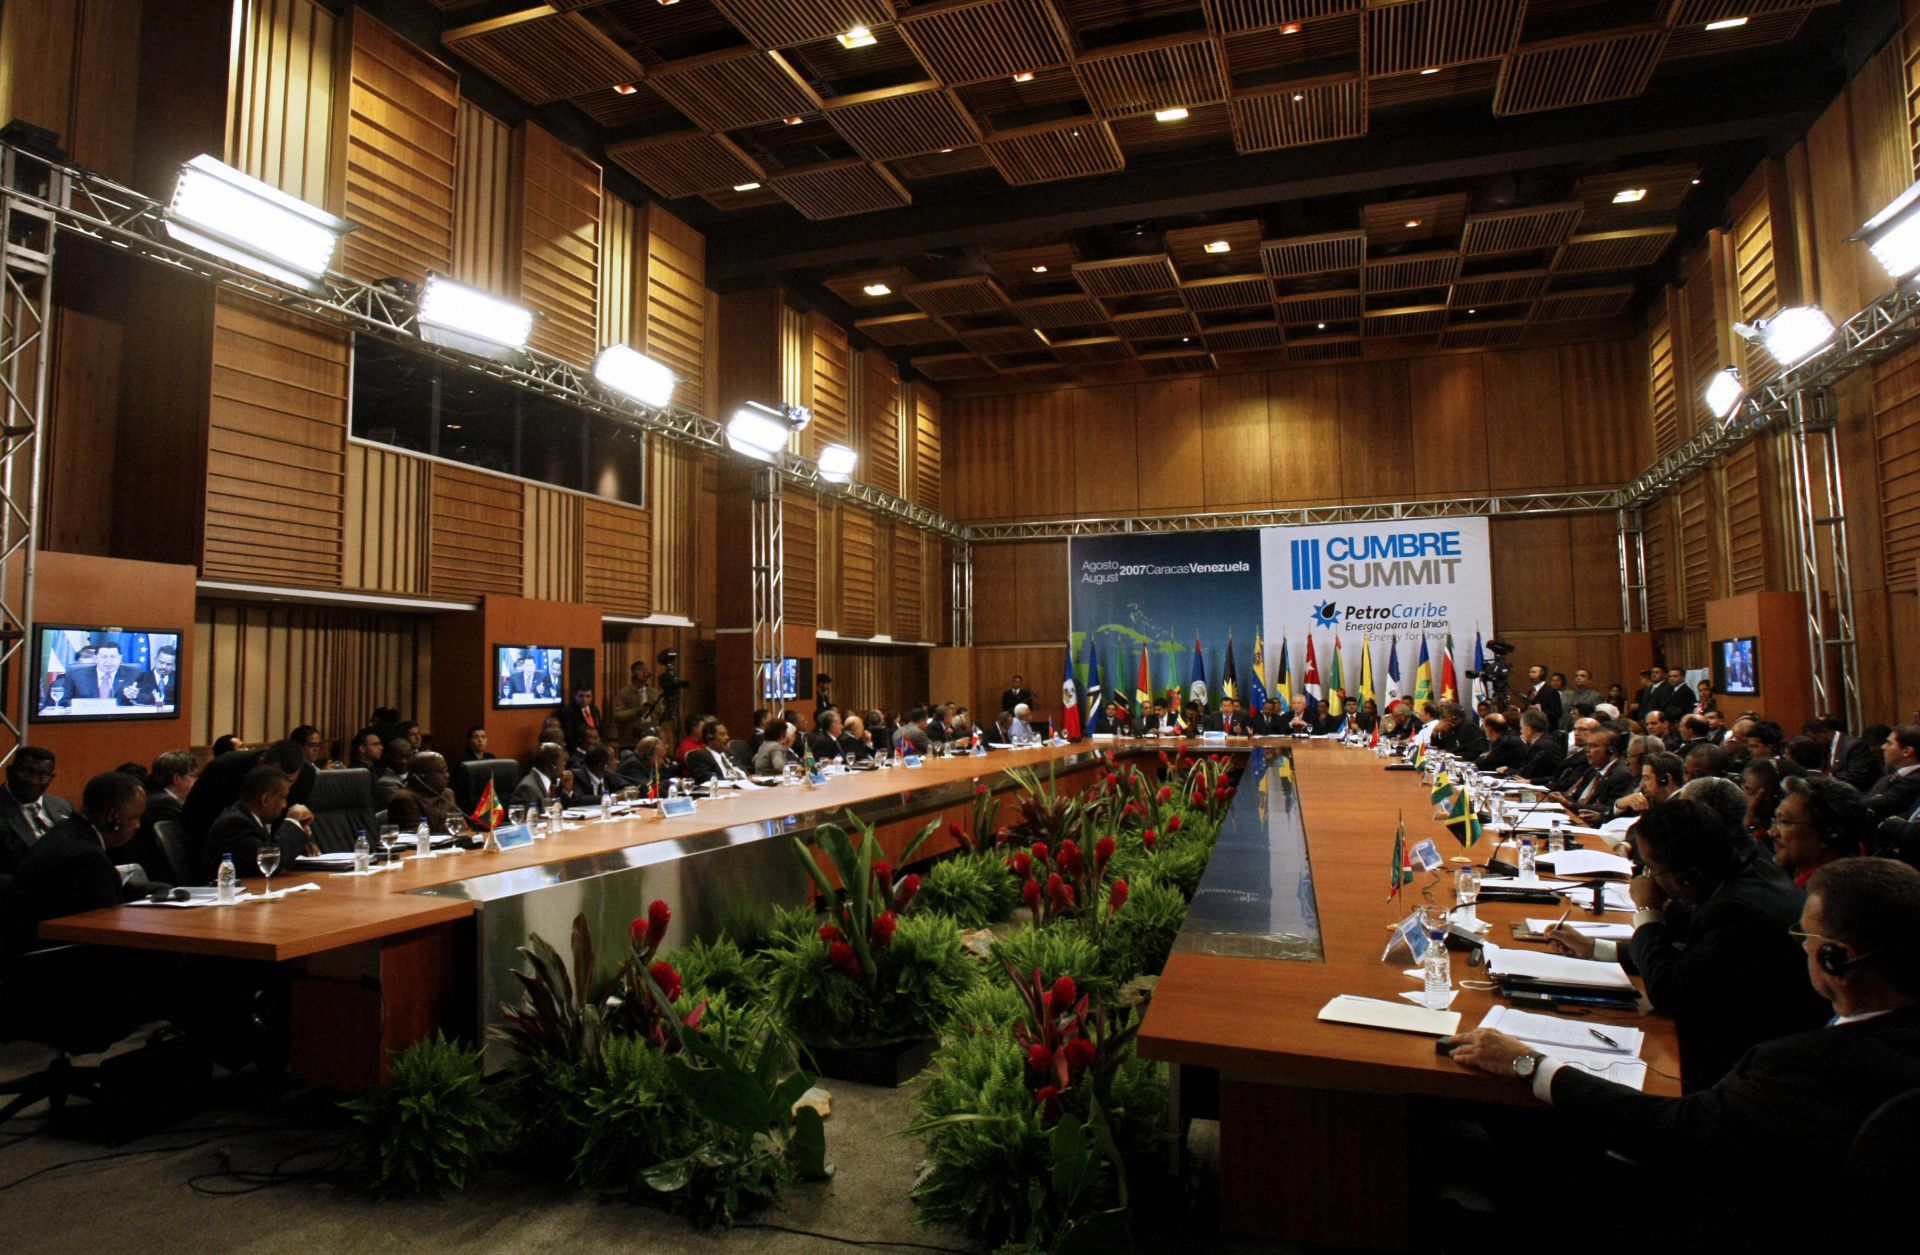 Guyana is a member of Petrocaribe, an alliance between Venezuela and Caribbean countries. The alliance's third summit was held in Caracas, Venezuela, in 2007.